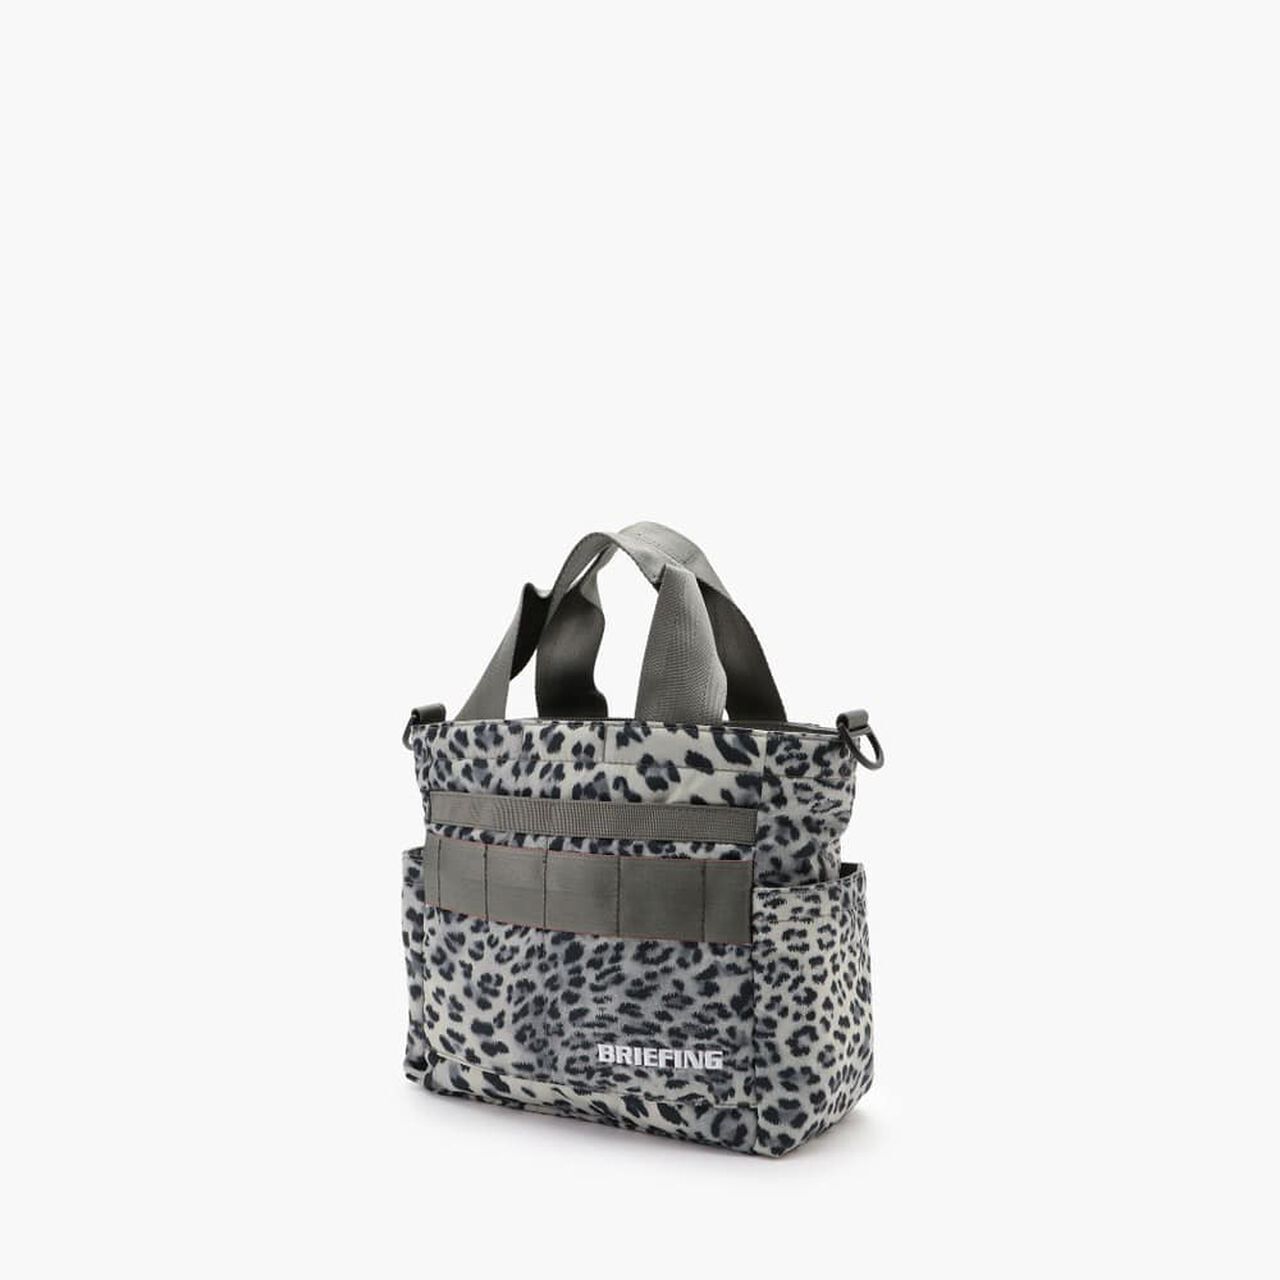 Buy CART TOTE LEOPARD for EUR 113.90 | BRIEFING